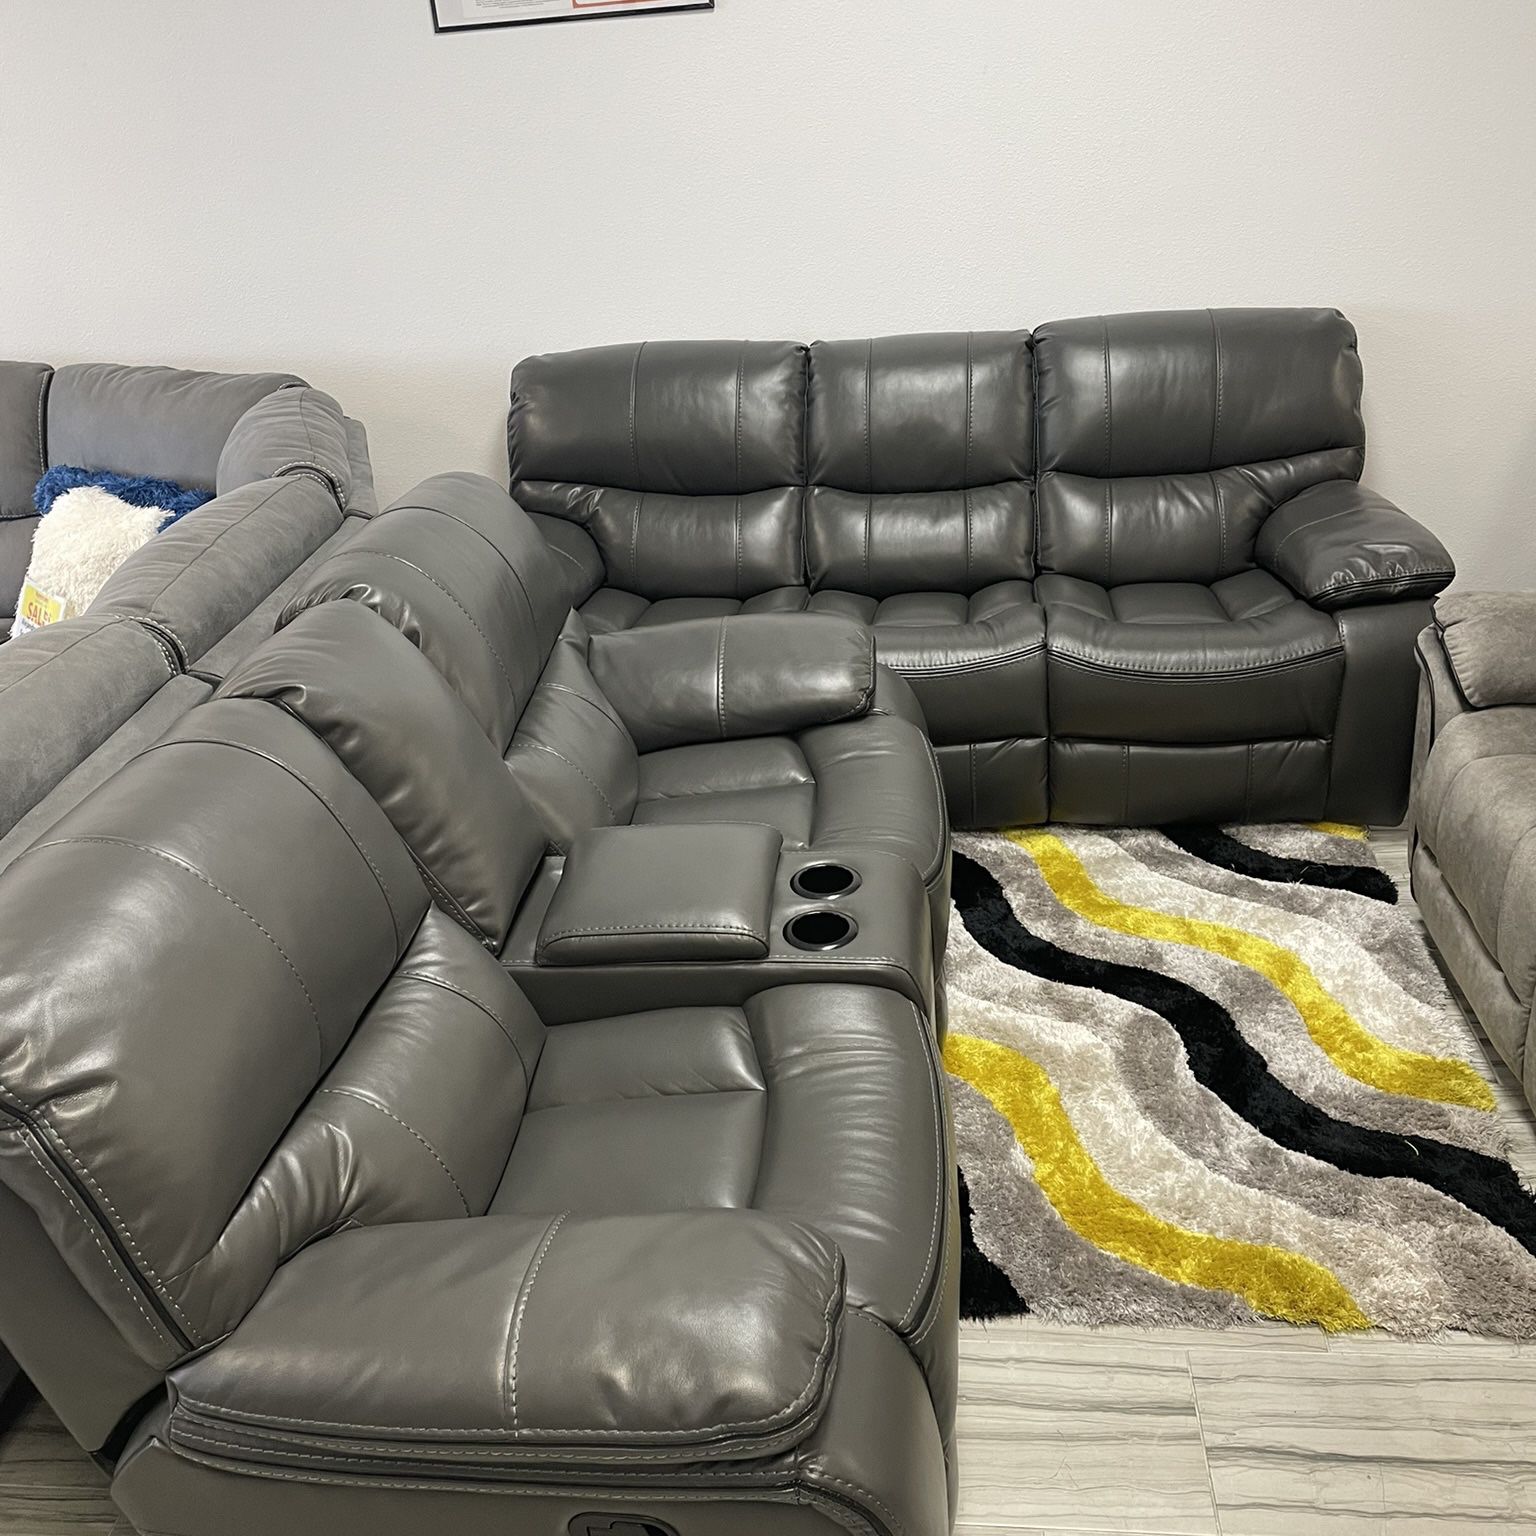 Madrid Gray Leather Reclining Sofa And Loveseat. Set Only $899. Easy Finance Option. Same-Day Delivery.